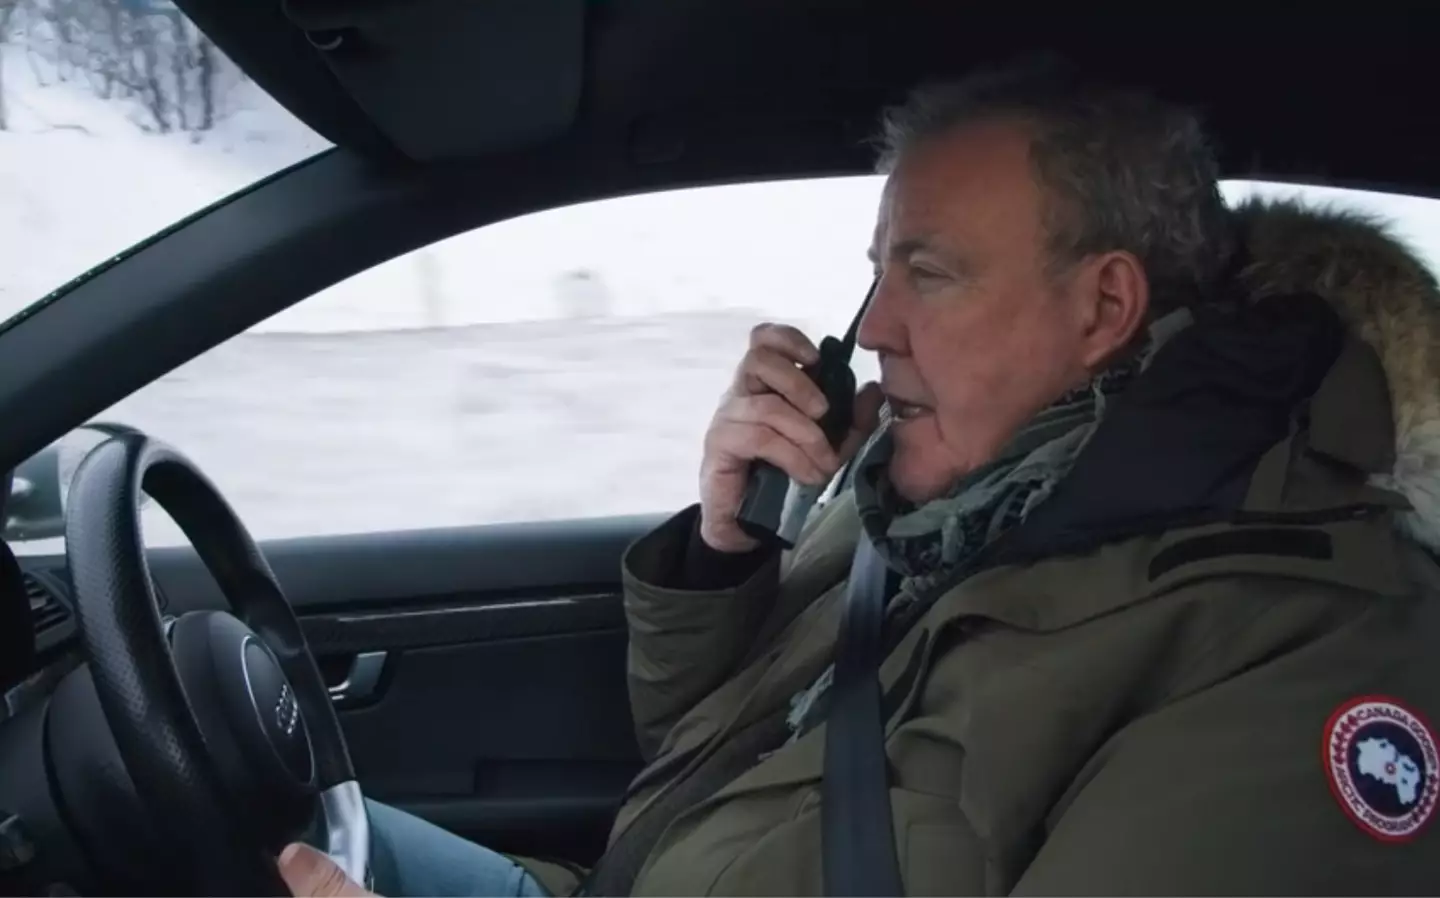 Clarkson on The Grand Tour (Prime Video)